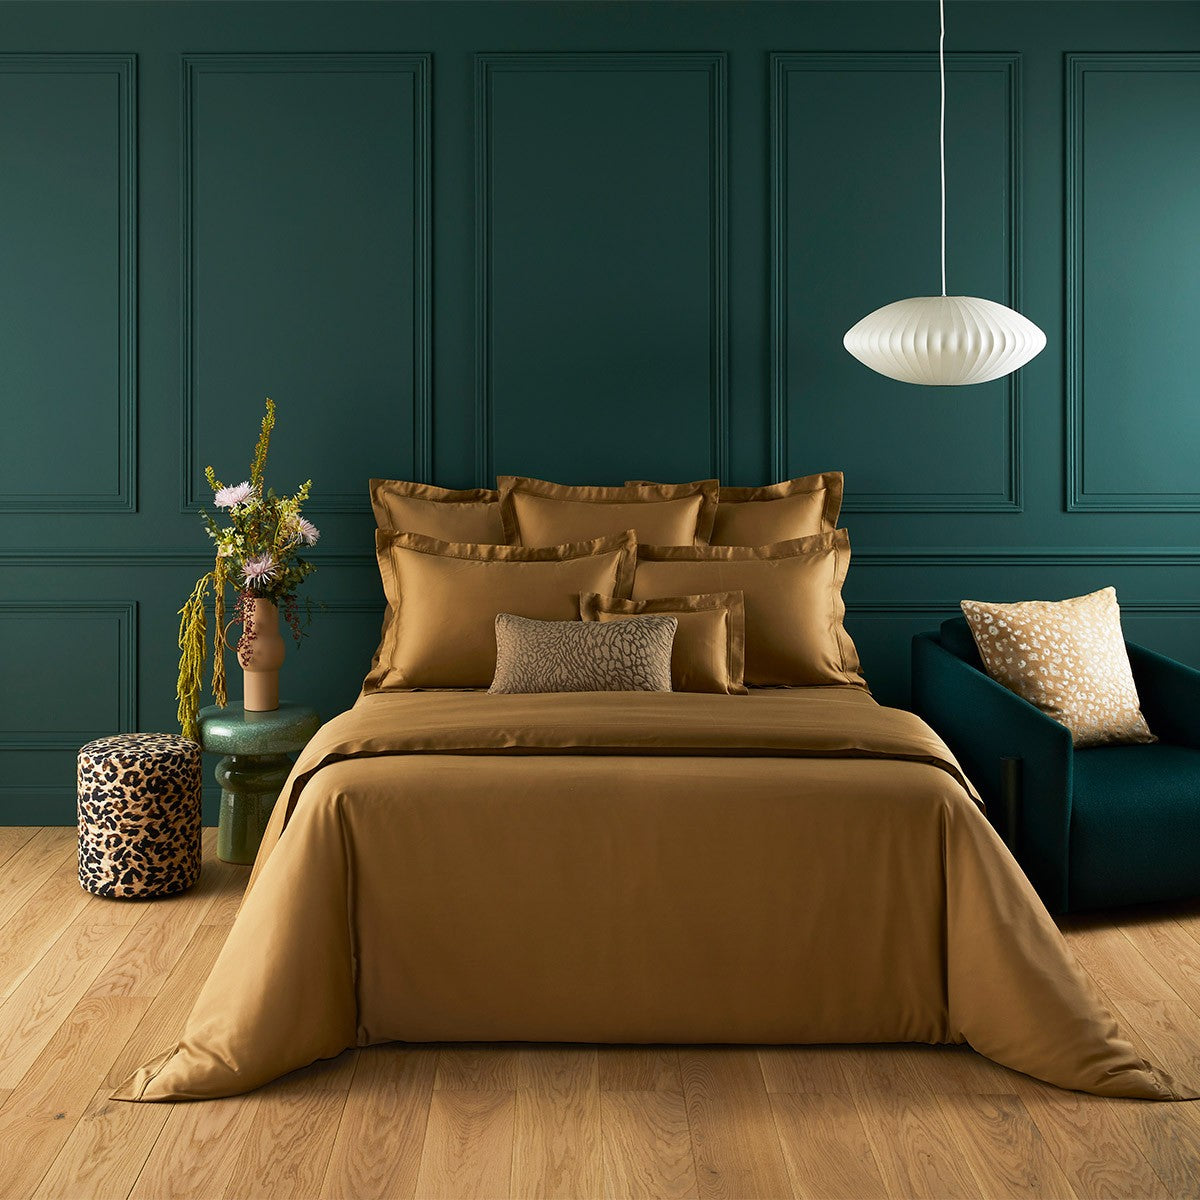 shop-the-official-shop-of-yves-delorme-triomphe-bedding-collection-online-now_3.jpg